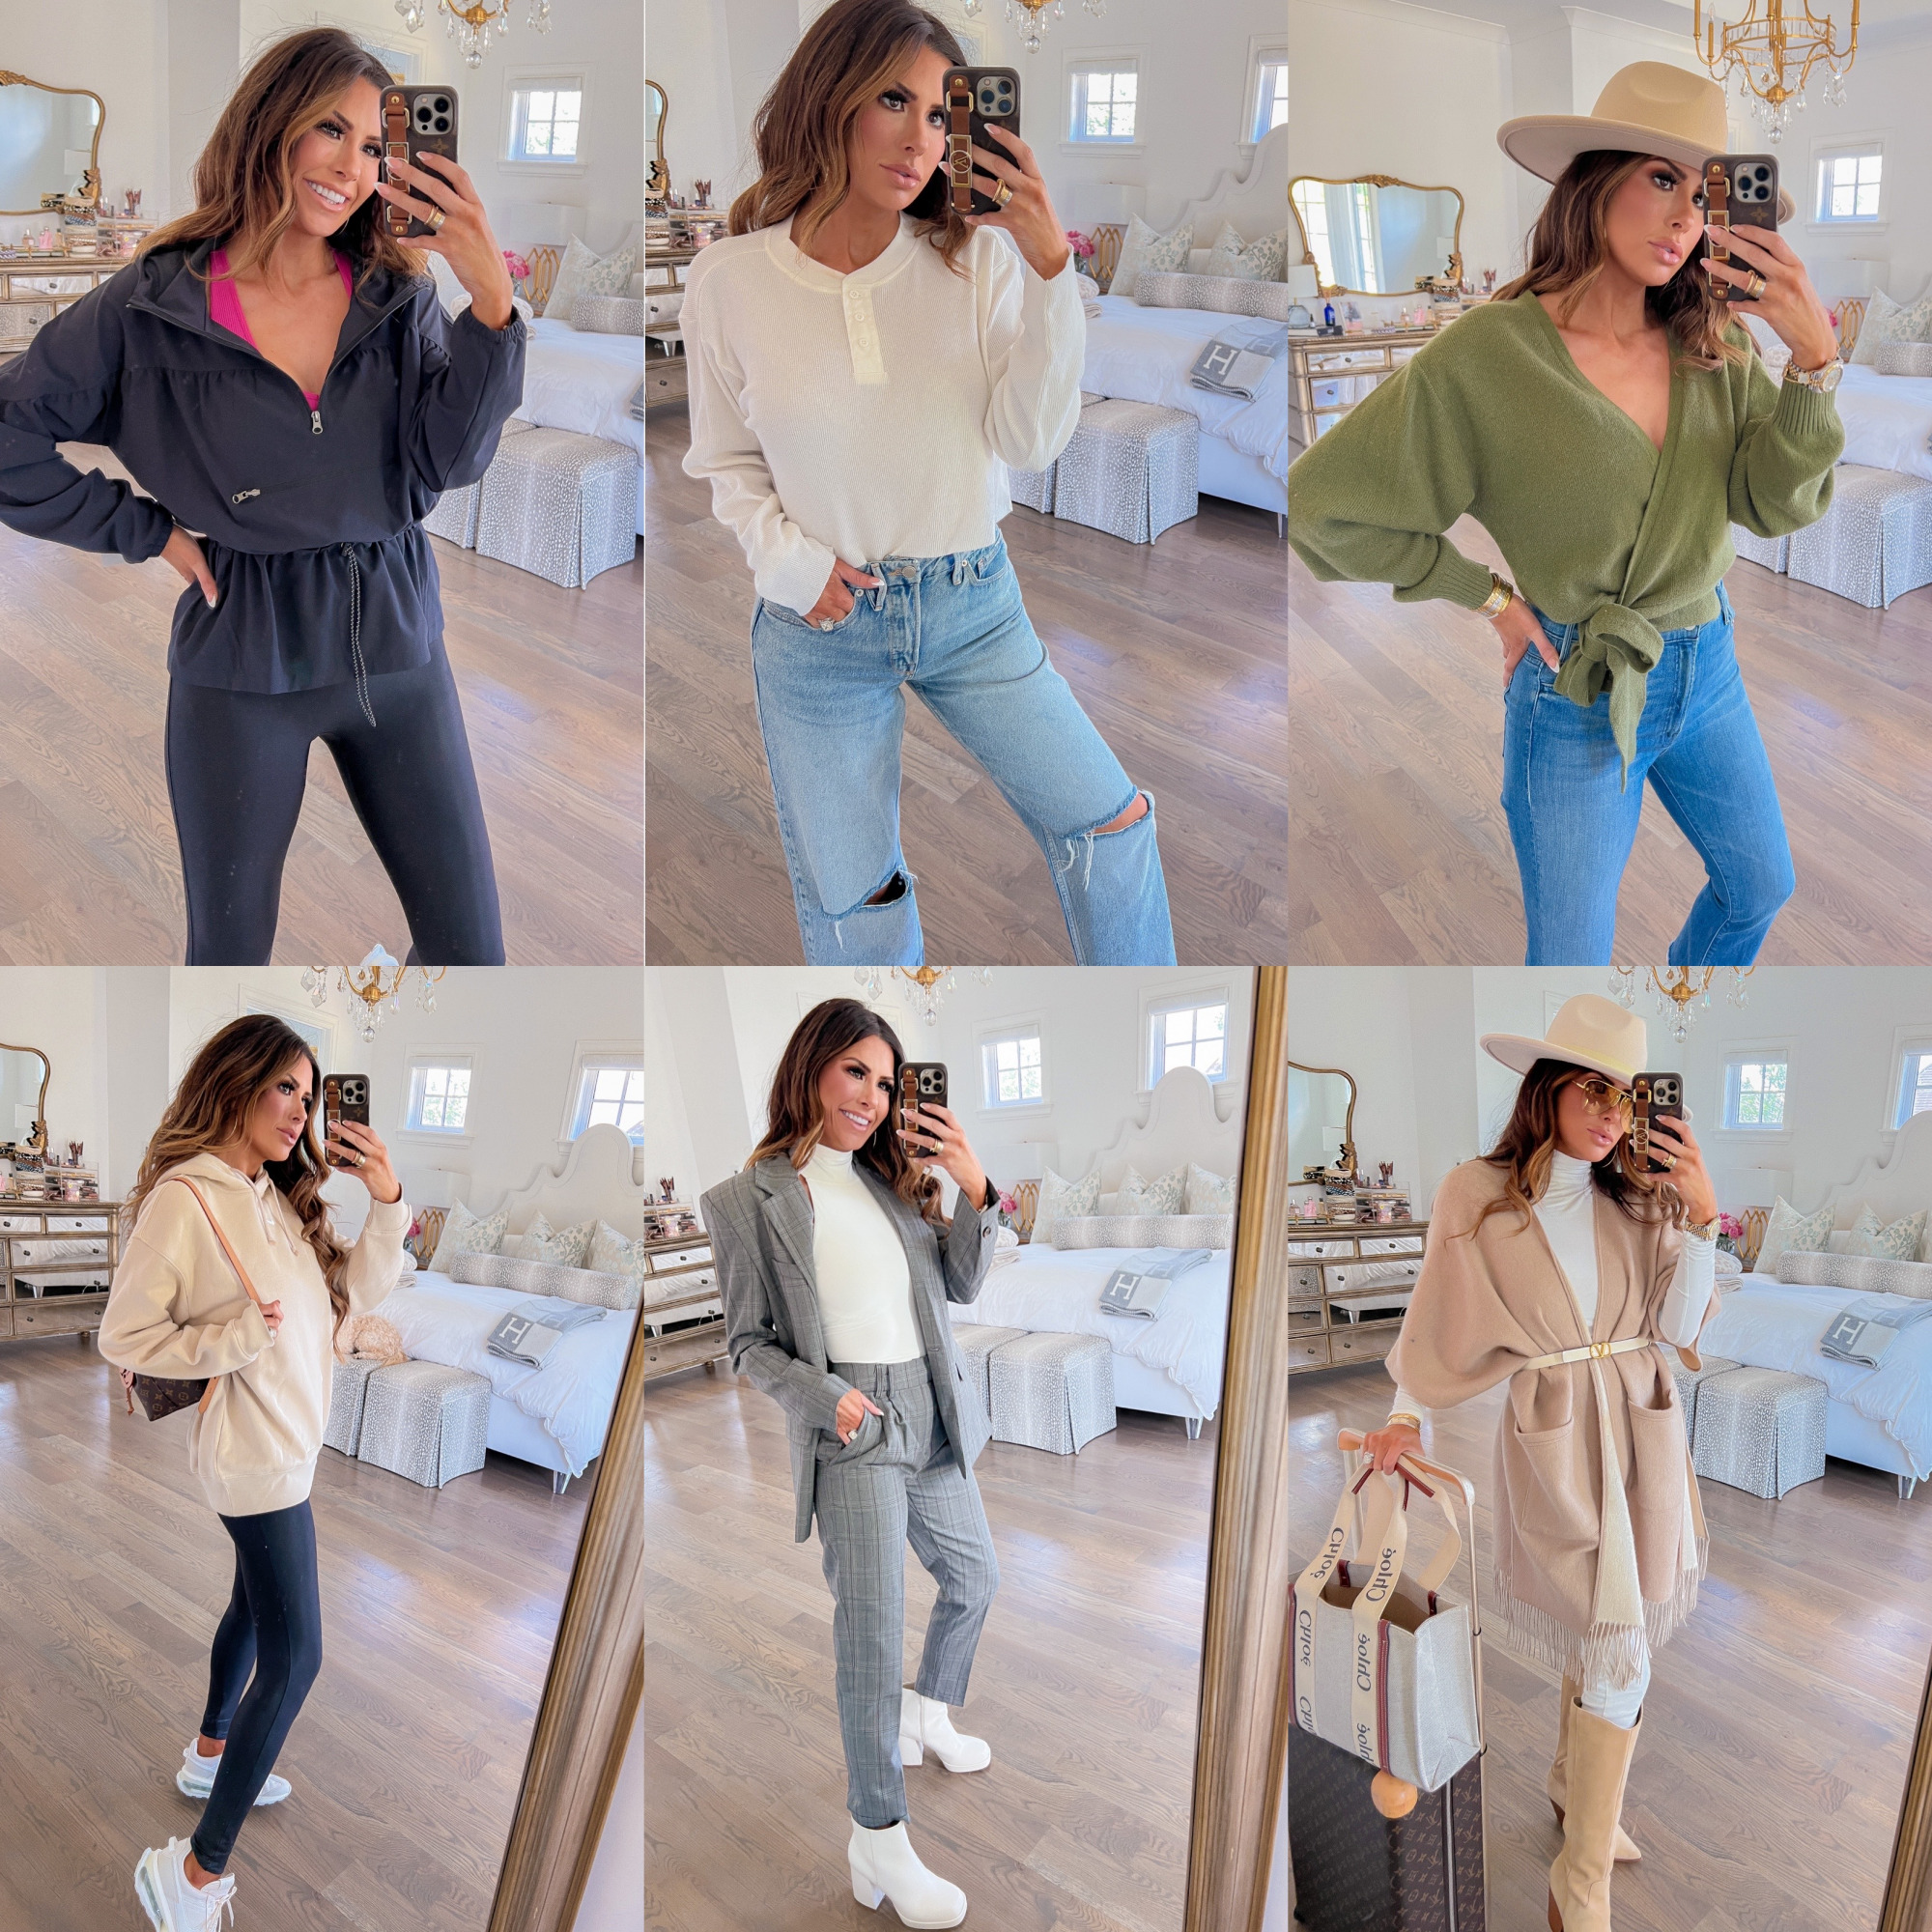 Nordstrom anniversary sale 2022 picks and try on haul, NSALE 2022 must haves blog post, nordstrom sale picks emily gemma2